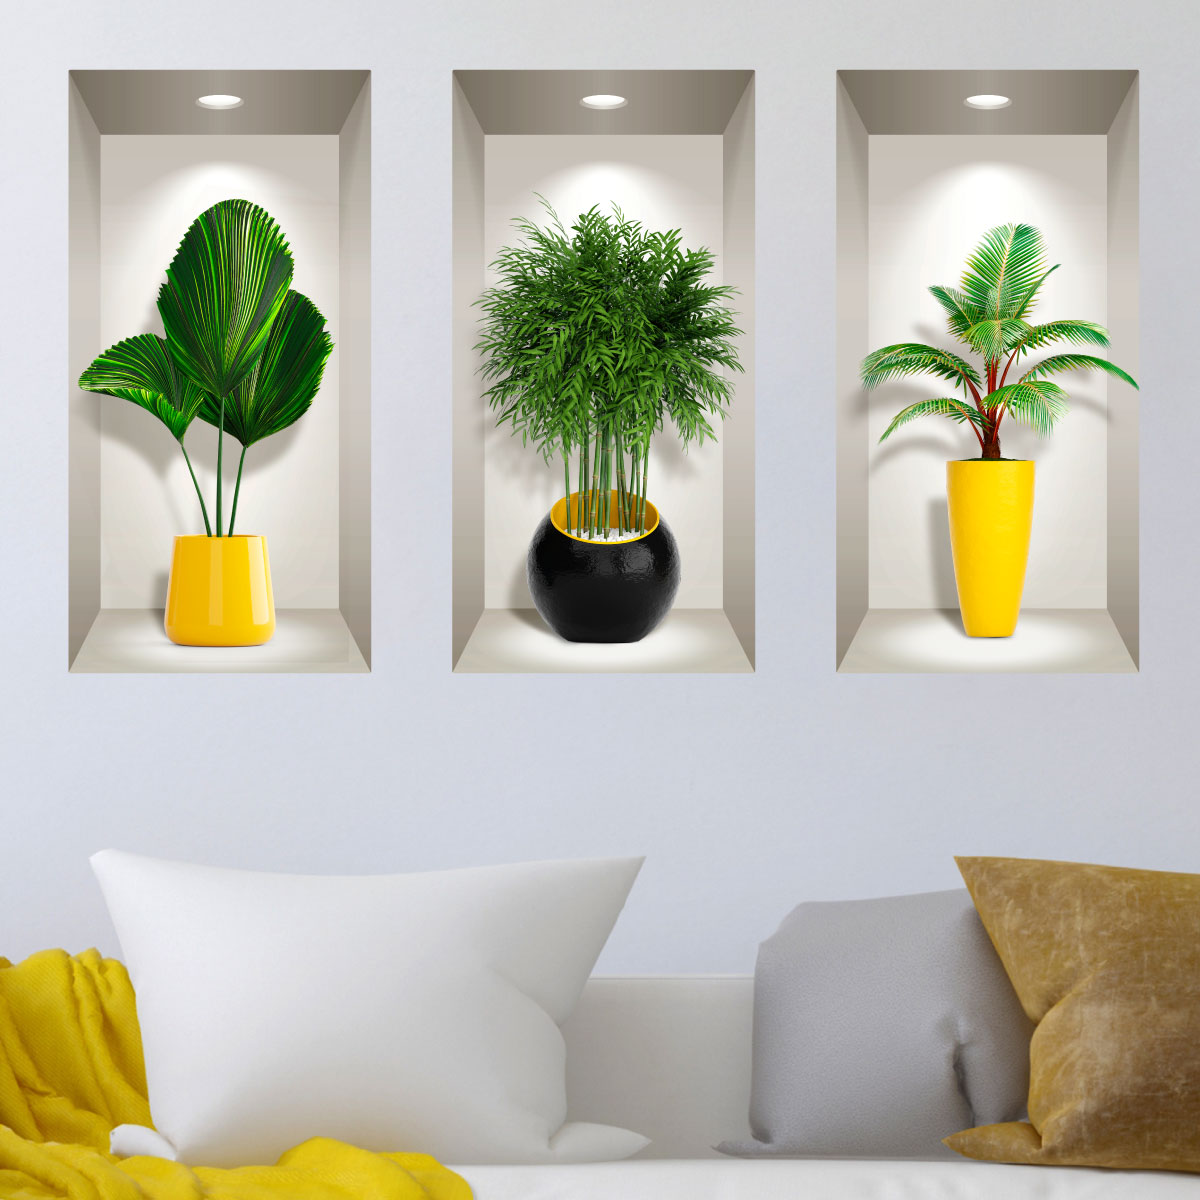 Wall decal 3D tropical plants